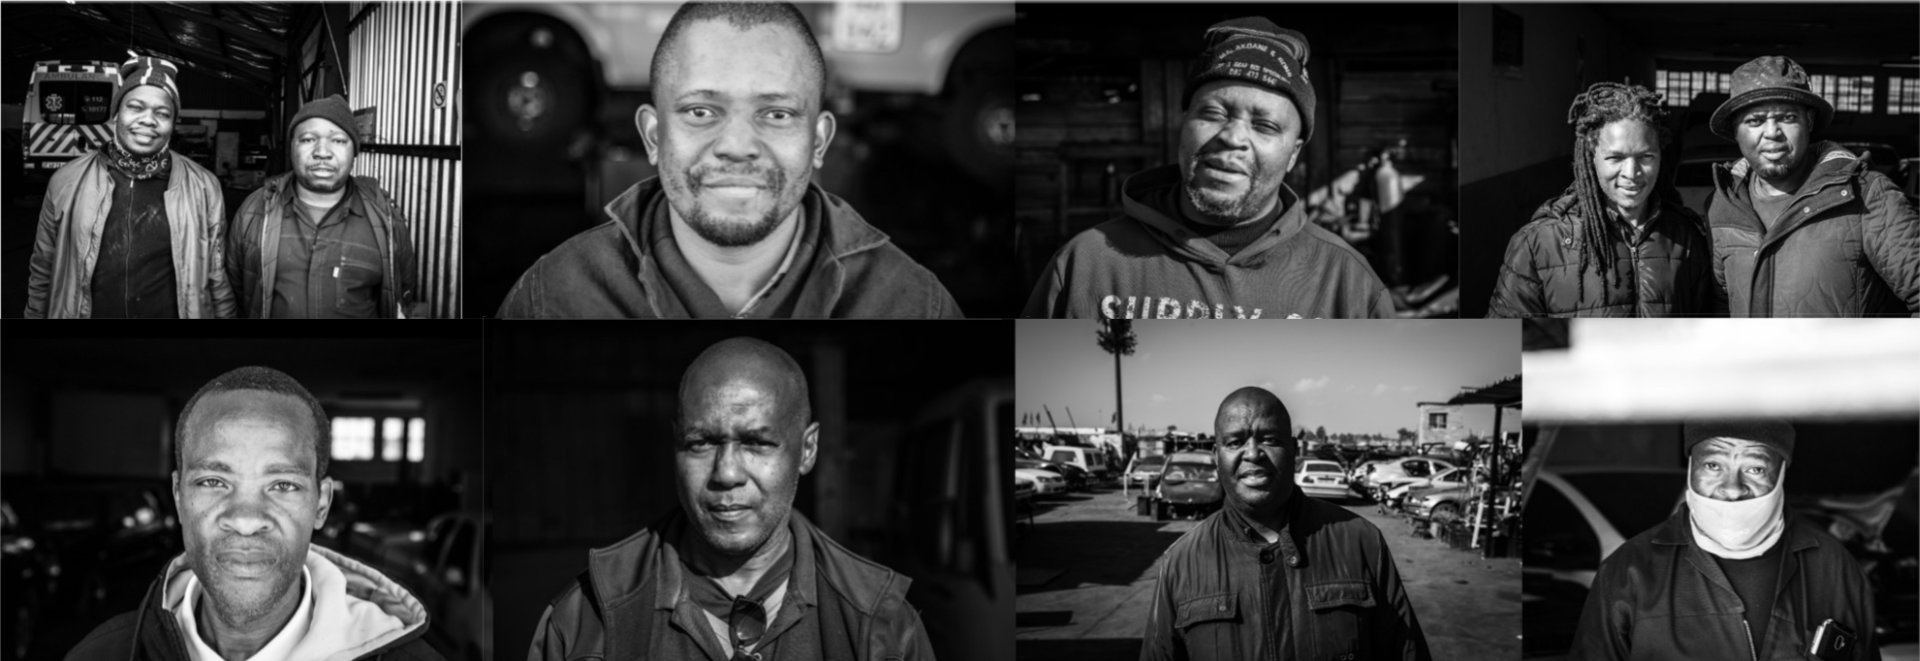 My Workshop Story, portraits of the story tellers